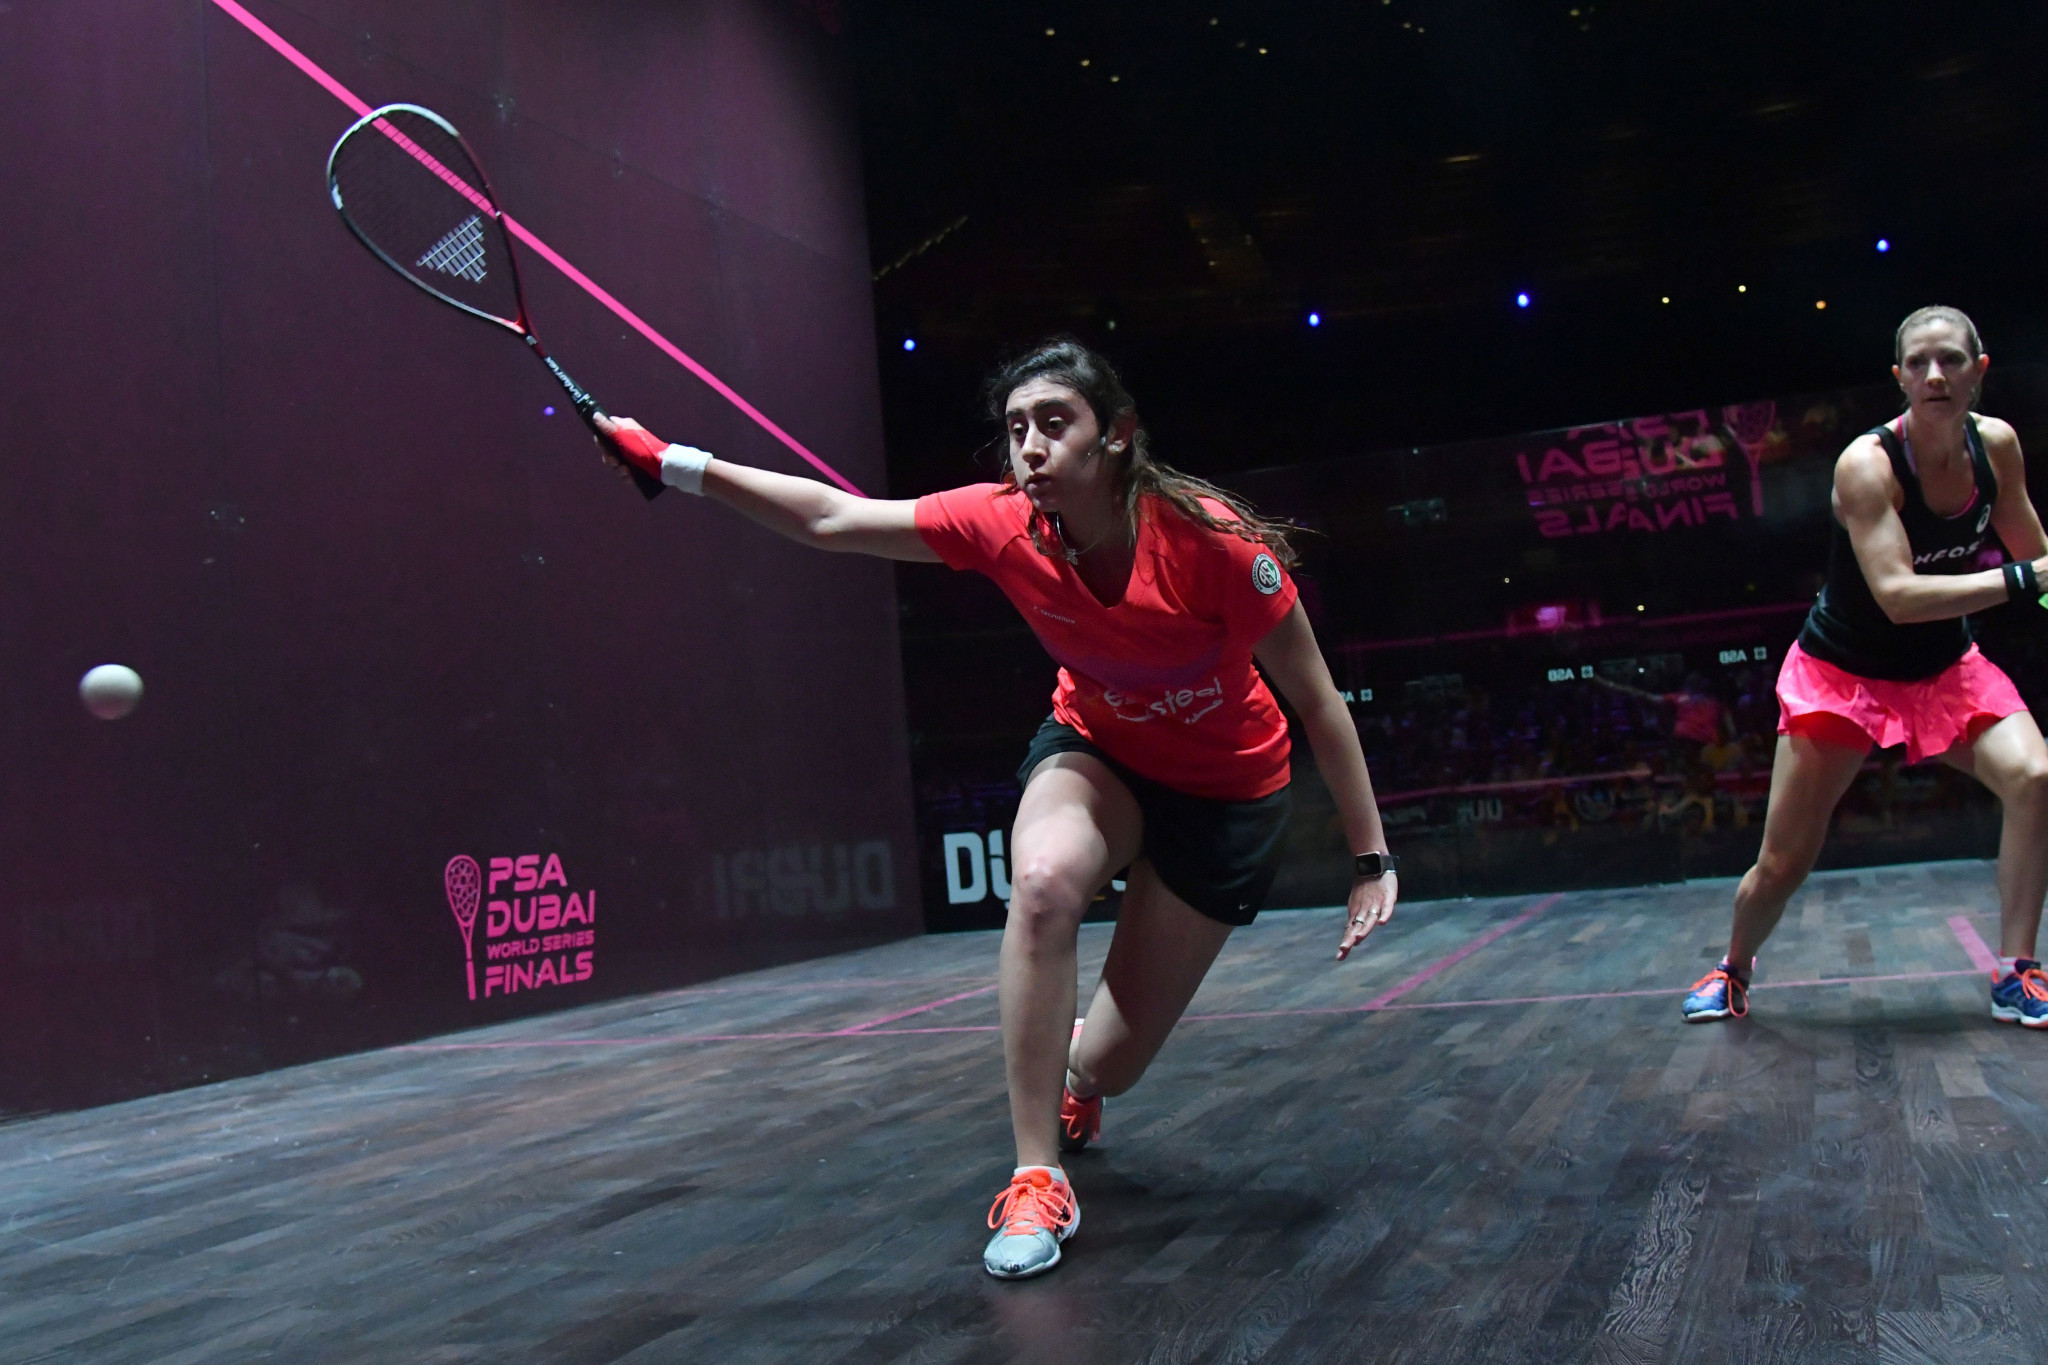 Nour El Sherbini of Egypt is the women's world number one in squash ©Getty Images